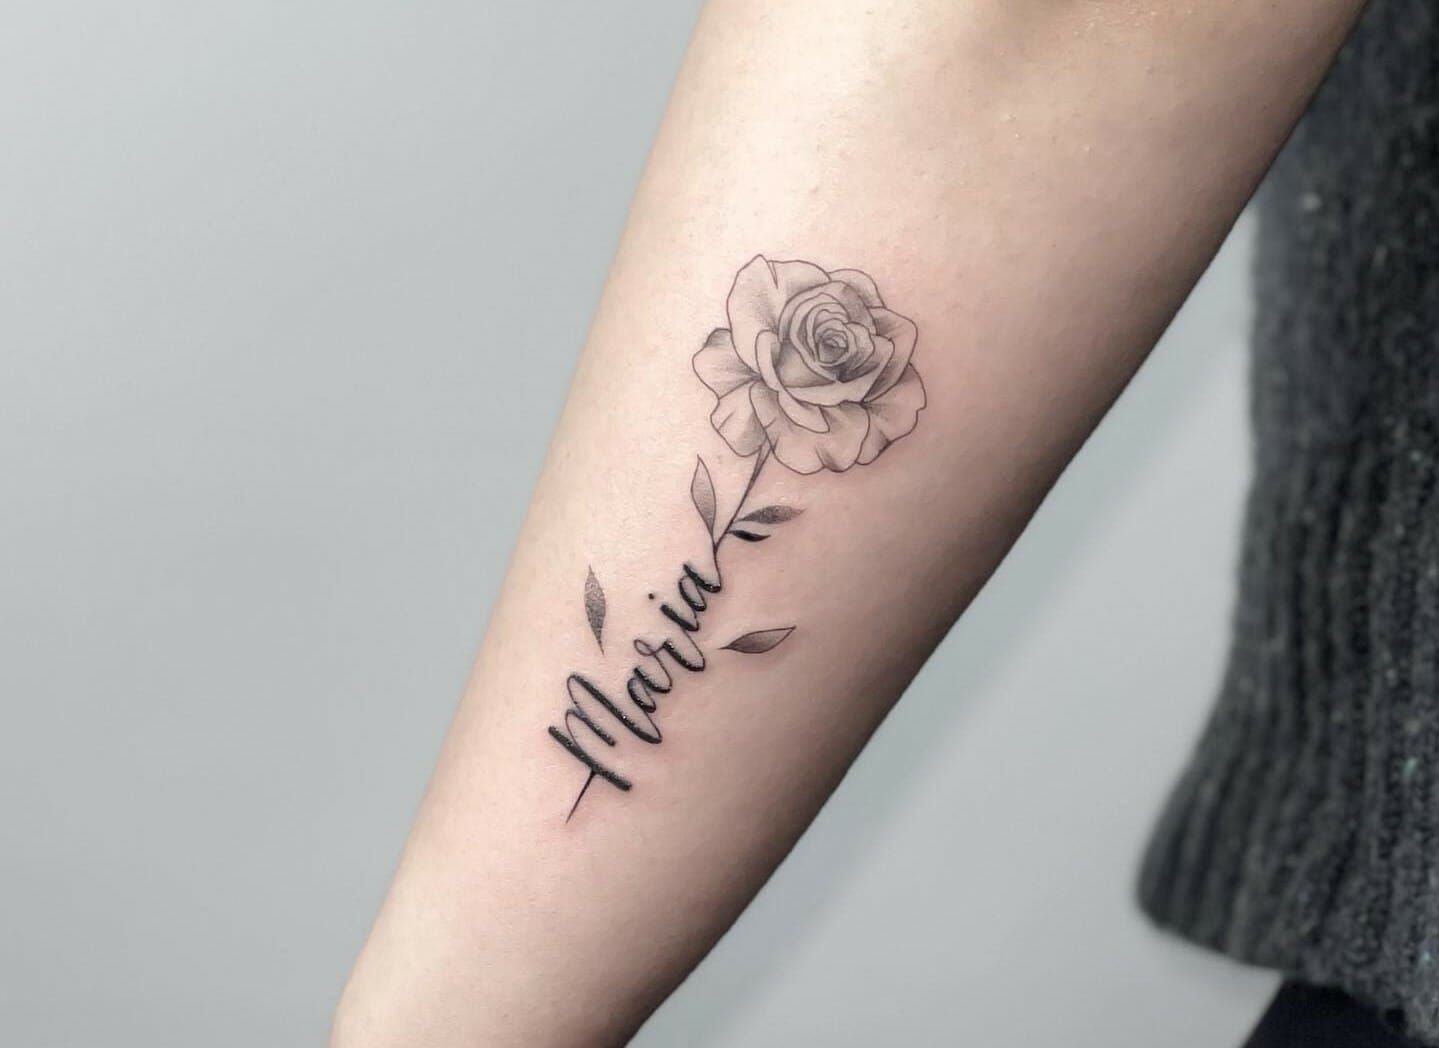 name tattoos with roses